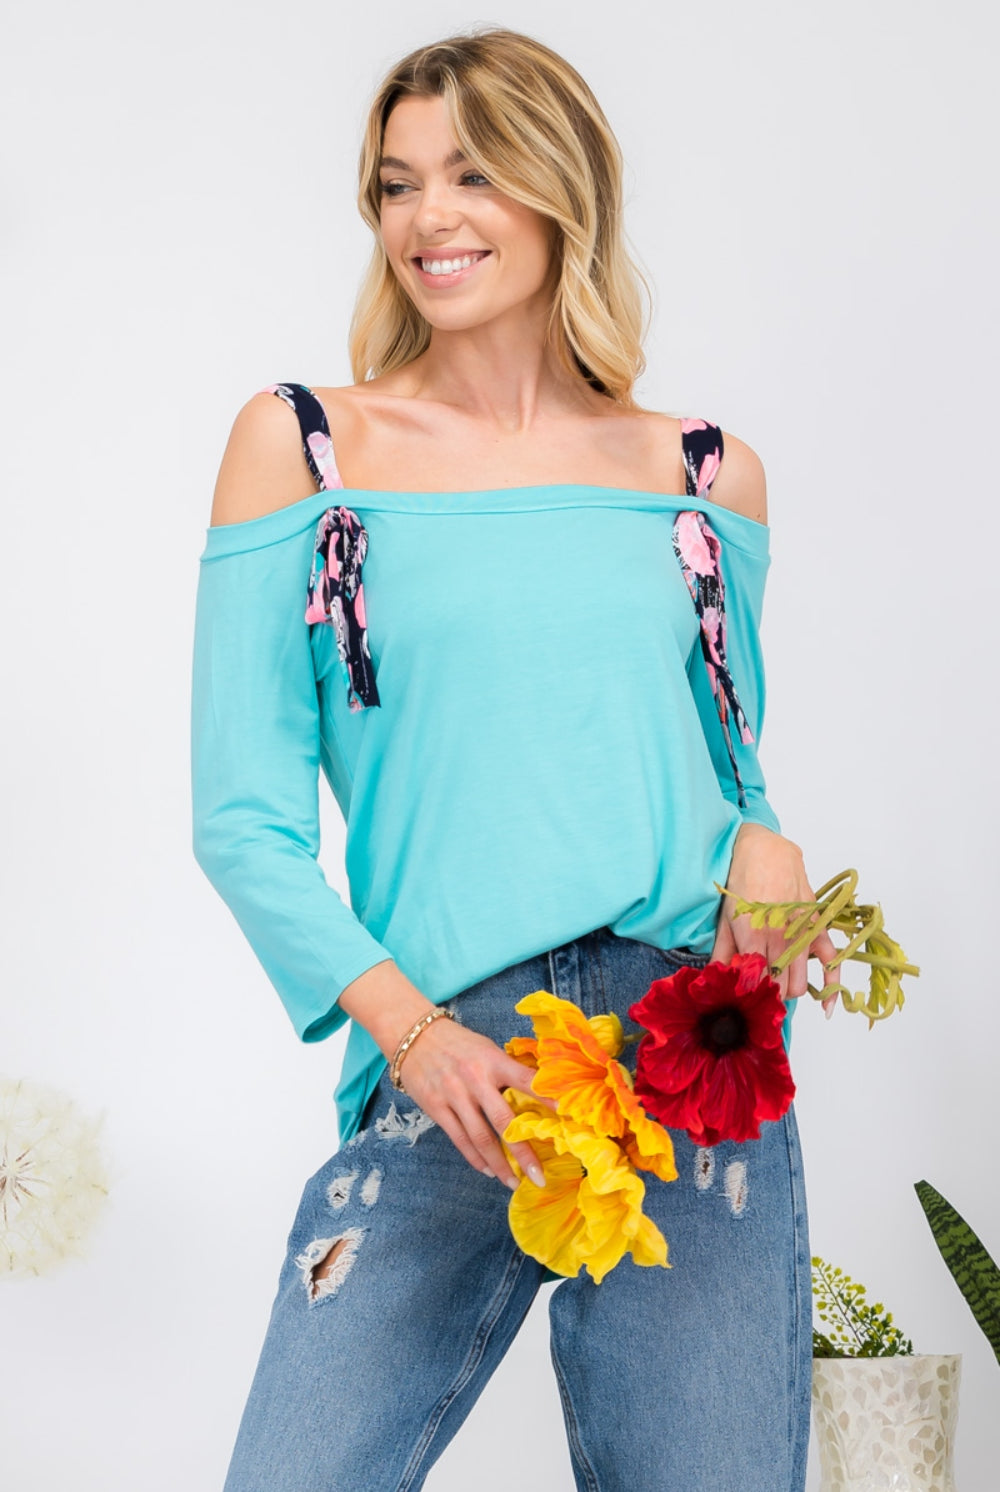 Smiling woman wearing a Sky Blue Off-Shoulder Blouse with floral tie sleeves, creating a playful yet elegant look, available at GemThreads Boutique.